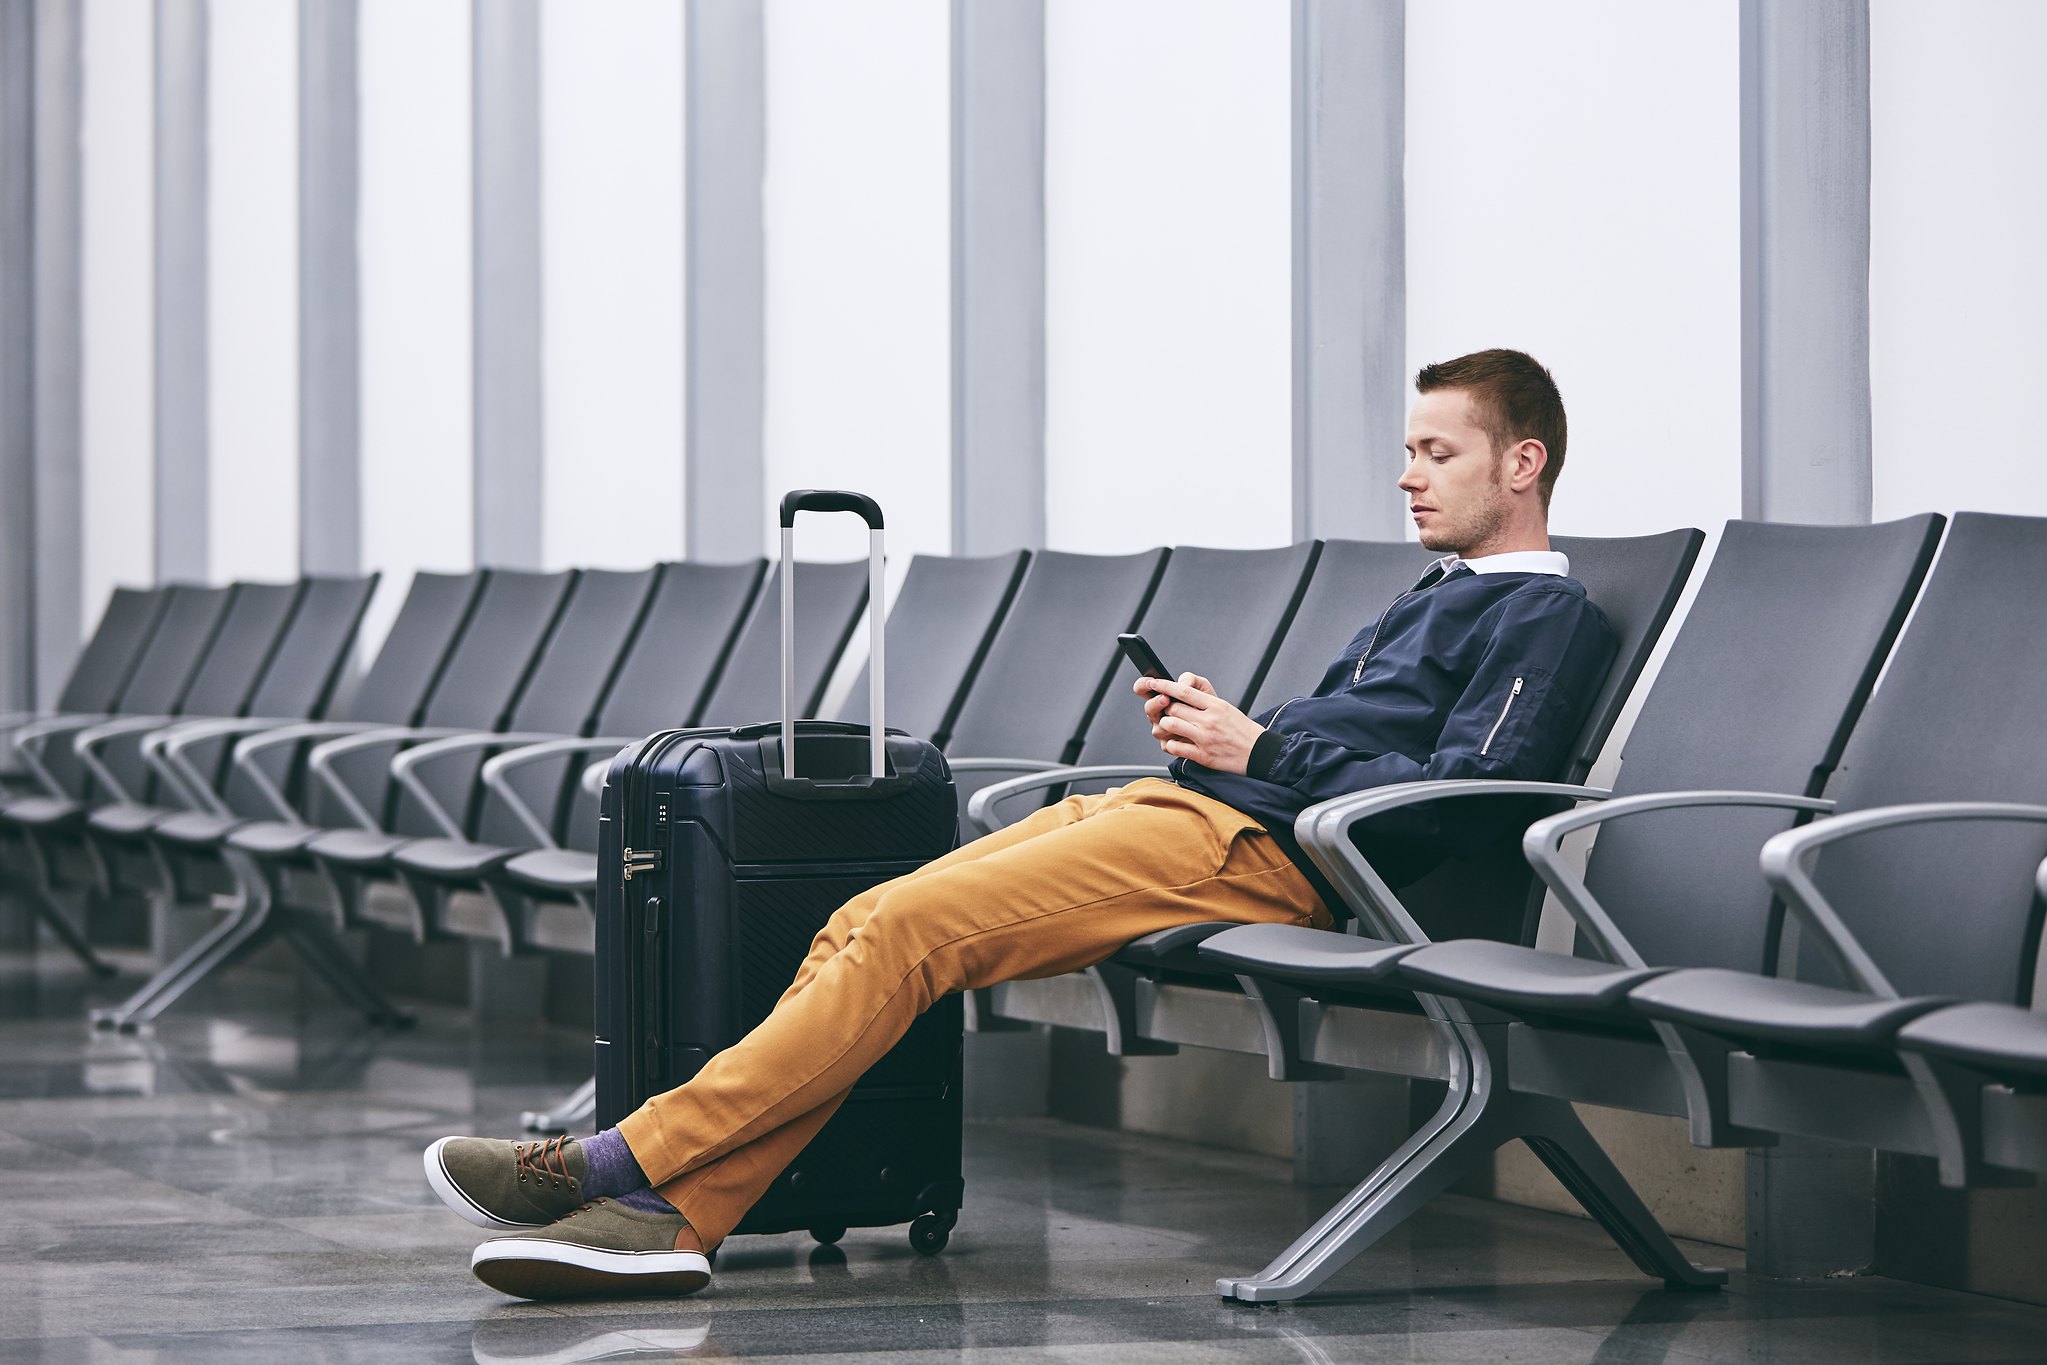 Passenger waiting to fly inside airport terminal